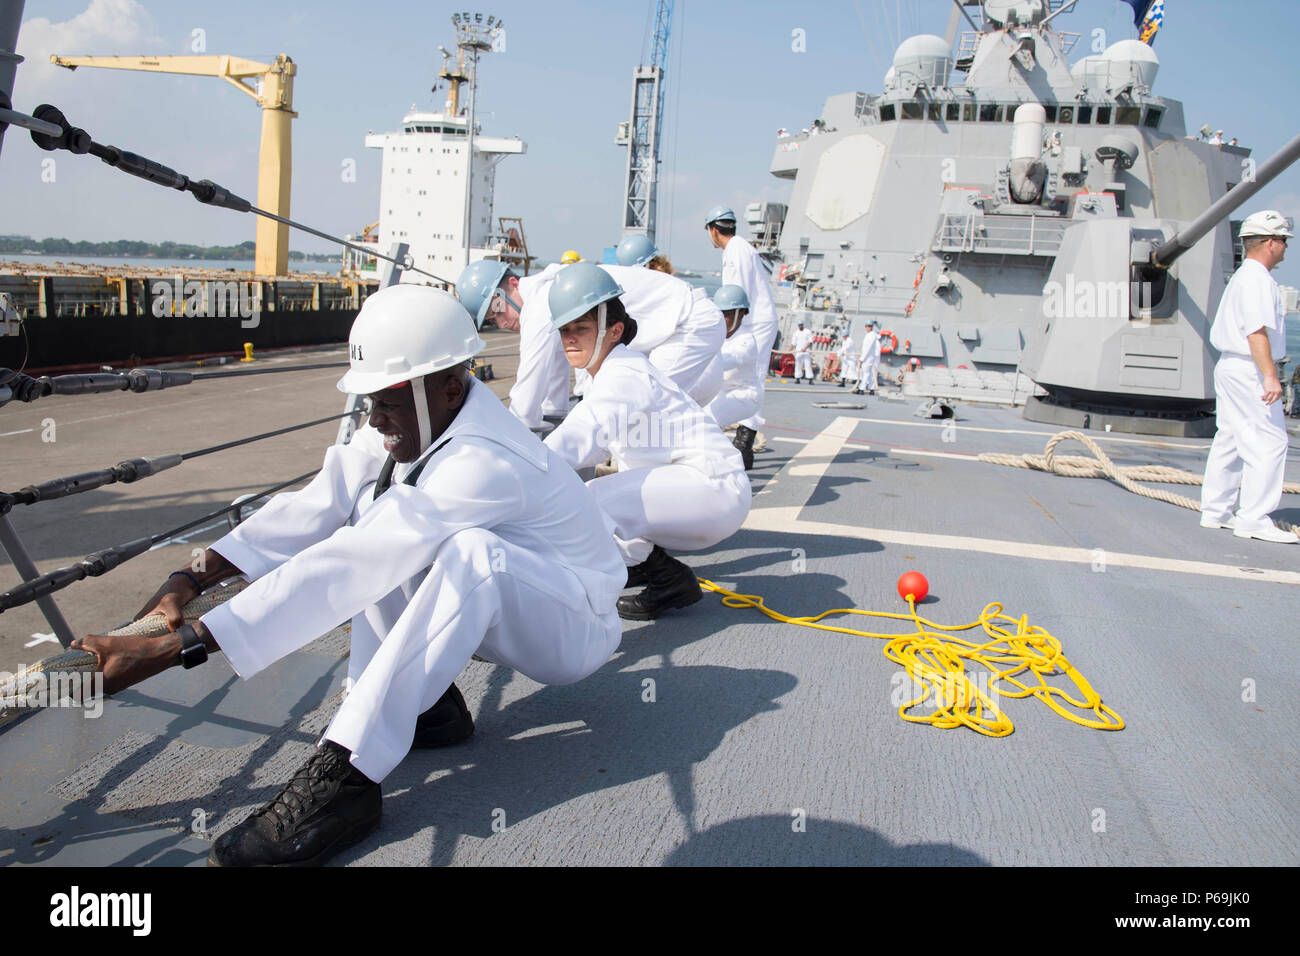 160519-N-MD297-072 CARTAGENA, Colombia (May 19, 2016) Sailors aboard the Arleigh Burke-class guided-missile destroyer USS Lassen (DDG 82) heave a mooring line as the ship moors in Cartagena, Colombia. Lassen is currently underway in support of Operation Martillo, a joint operation with the U.S. Coast Guard and partner nations within the 4th Fleet area of responsibility. Operation Martillo is being led by Joint Interagency Task Force South, in support of U.S. Southern Command. (U.S. Navy photo by Mass Communication Specialist 2nd Class Huey D. Younger Jr./Released) Stock Photo